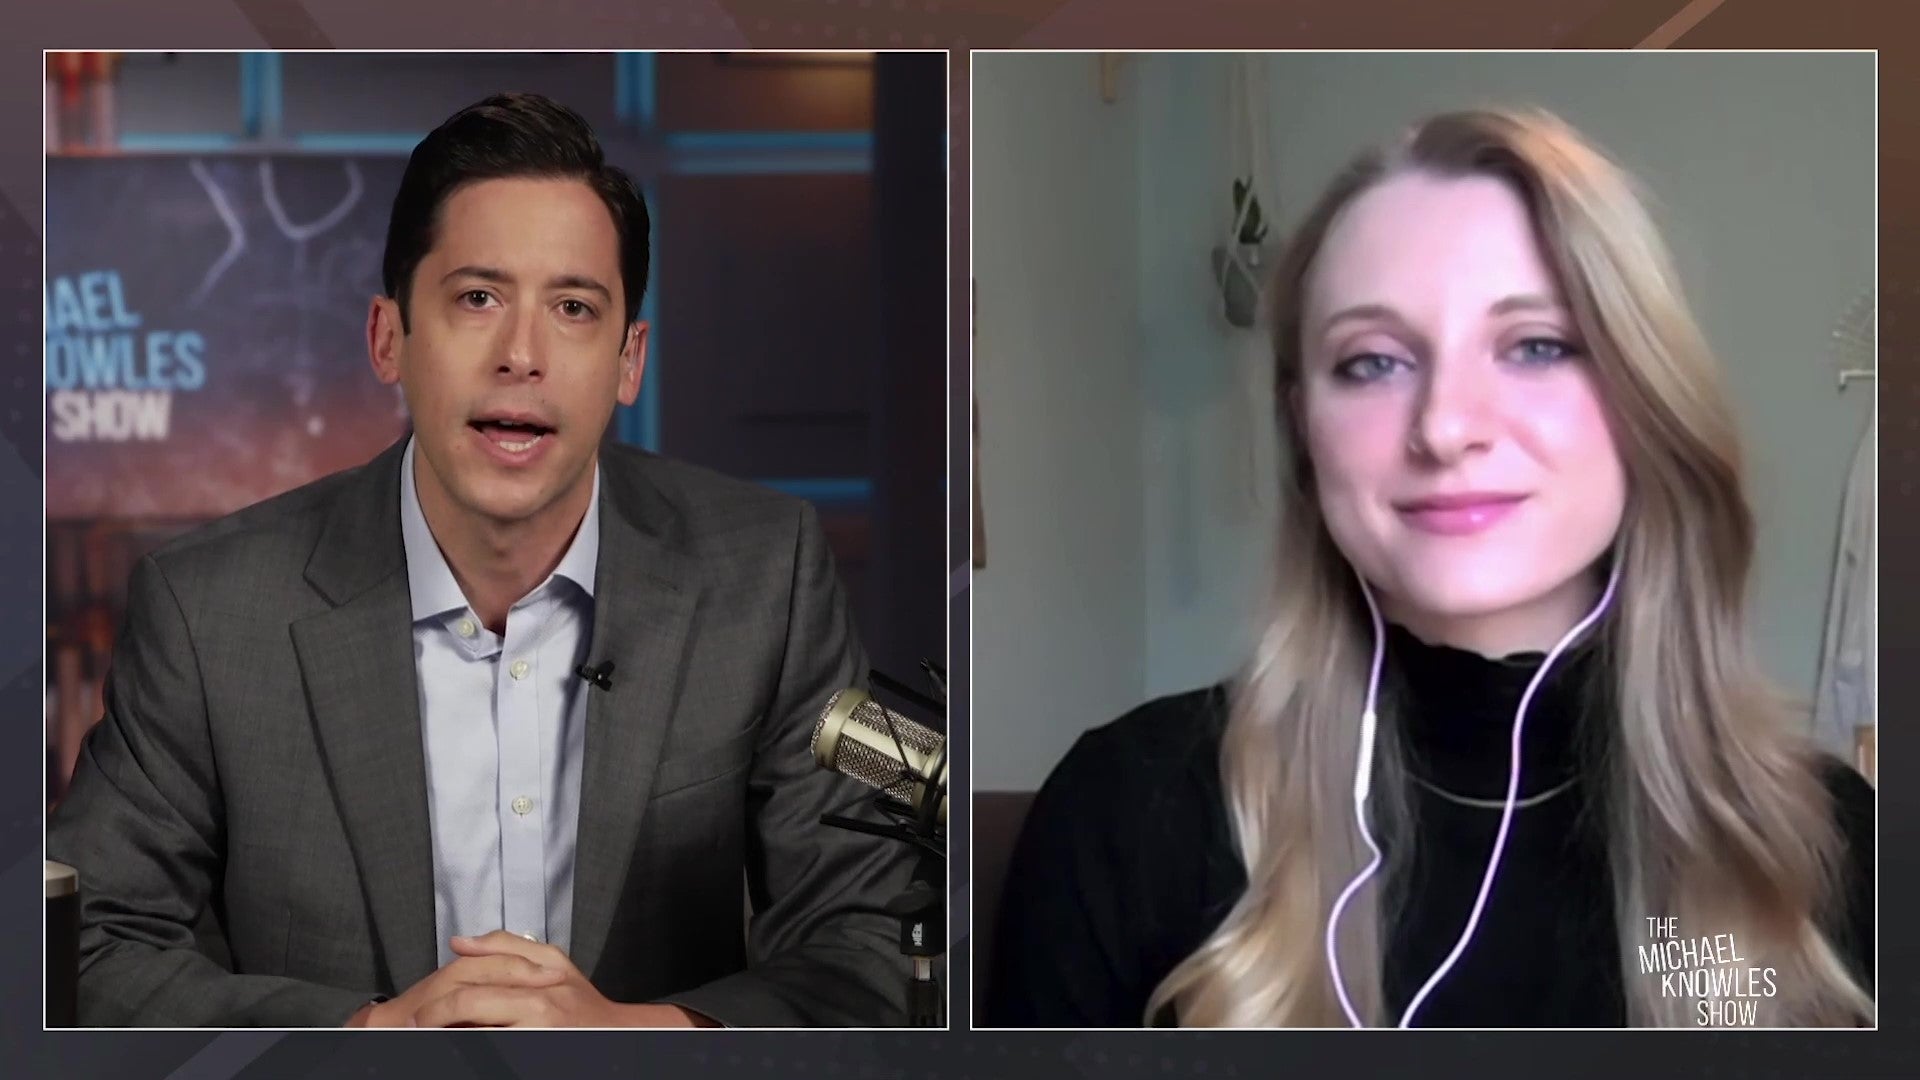 My Interview with Conservative Troll Michael Knowles of The Daily Wire